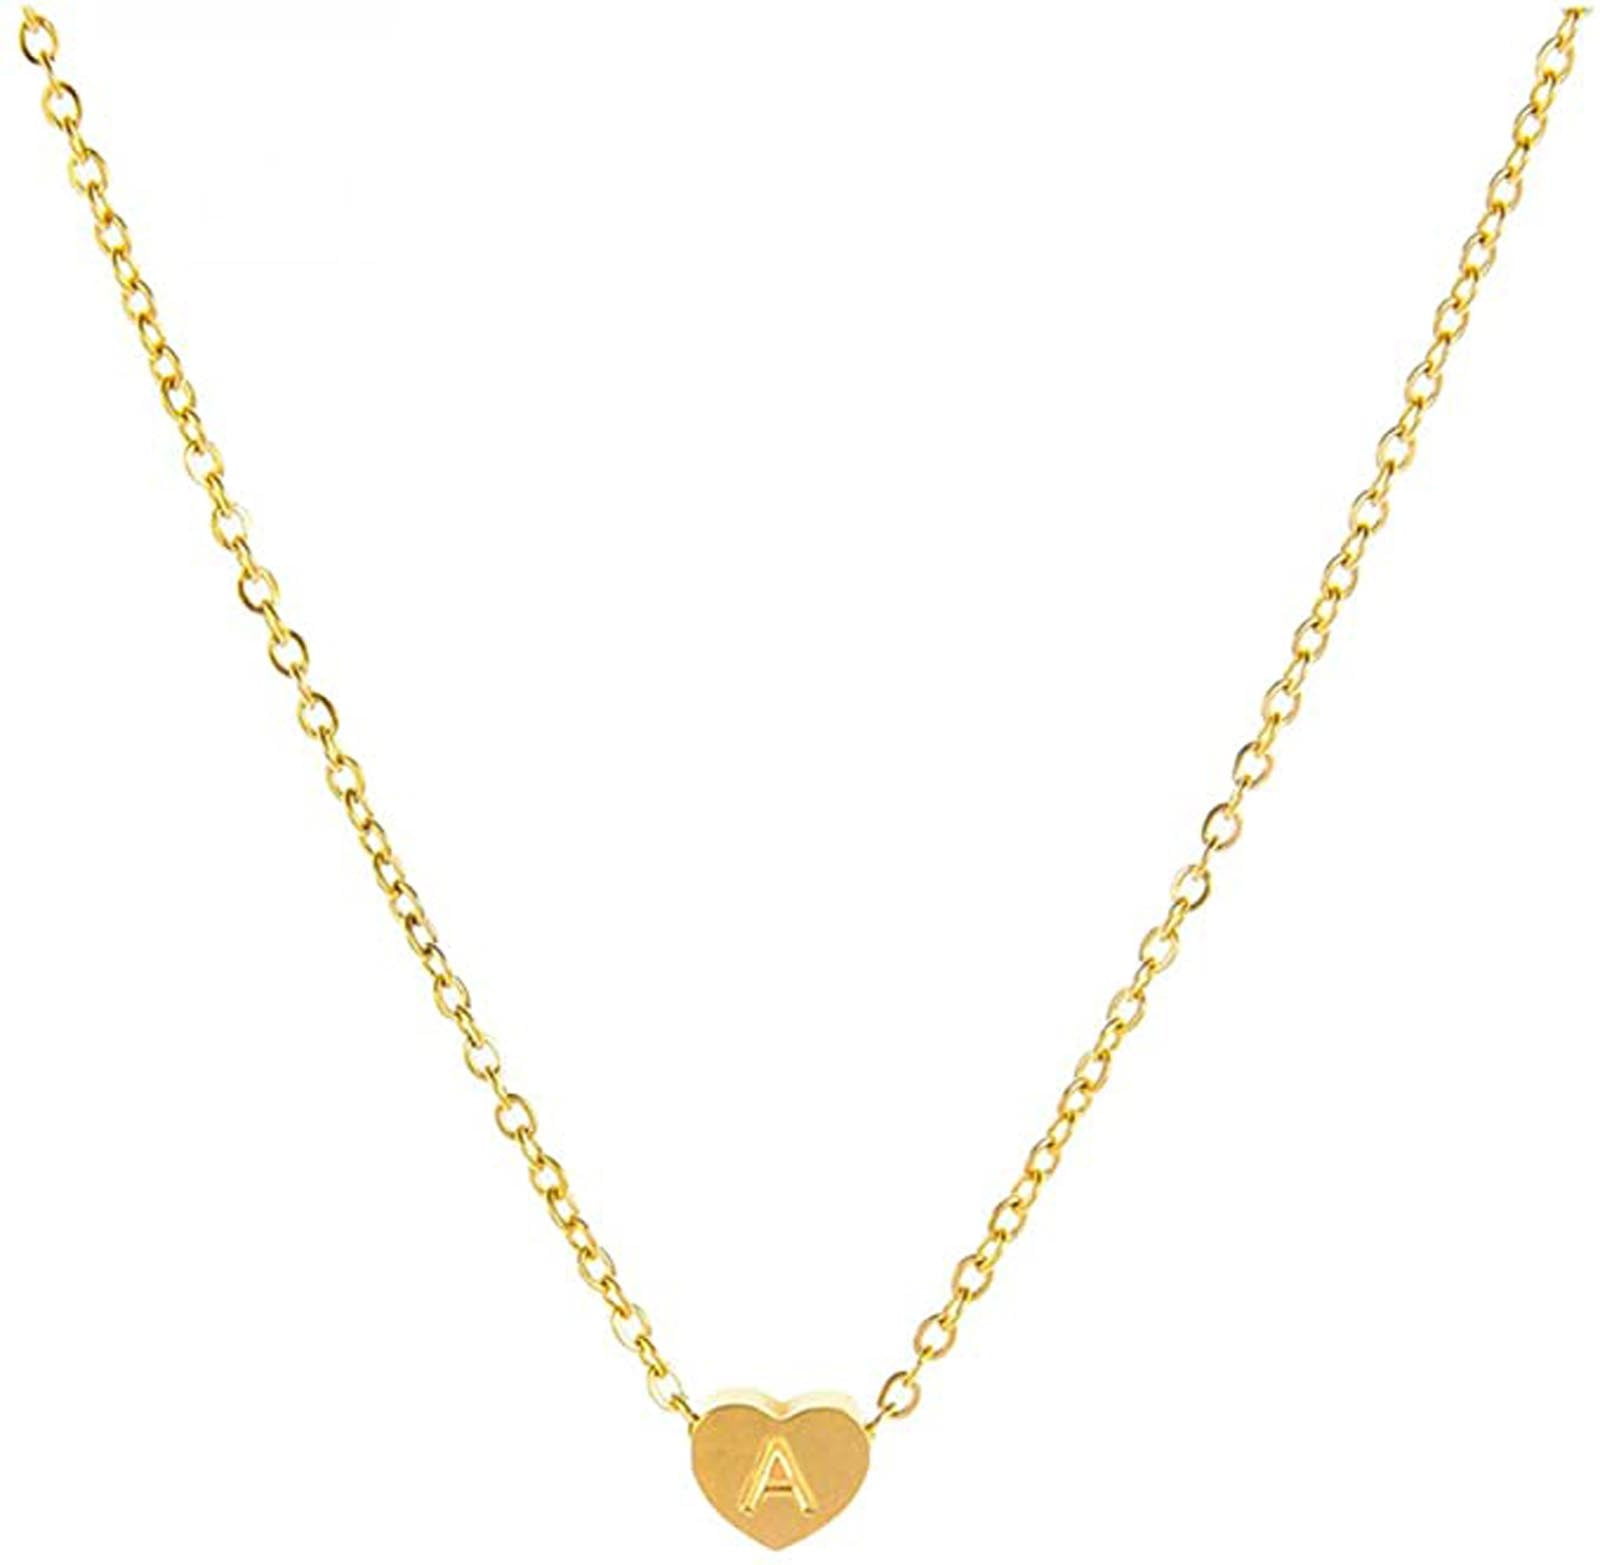 Details about   14K Real Yellow Gold Open Heart CZ Pendant For Girls Women  Real Gold Pendant 